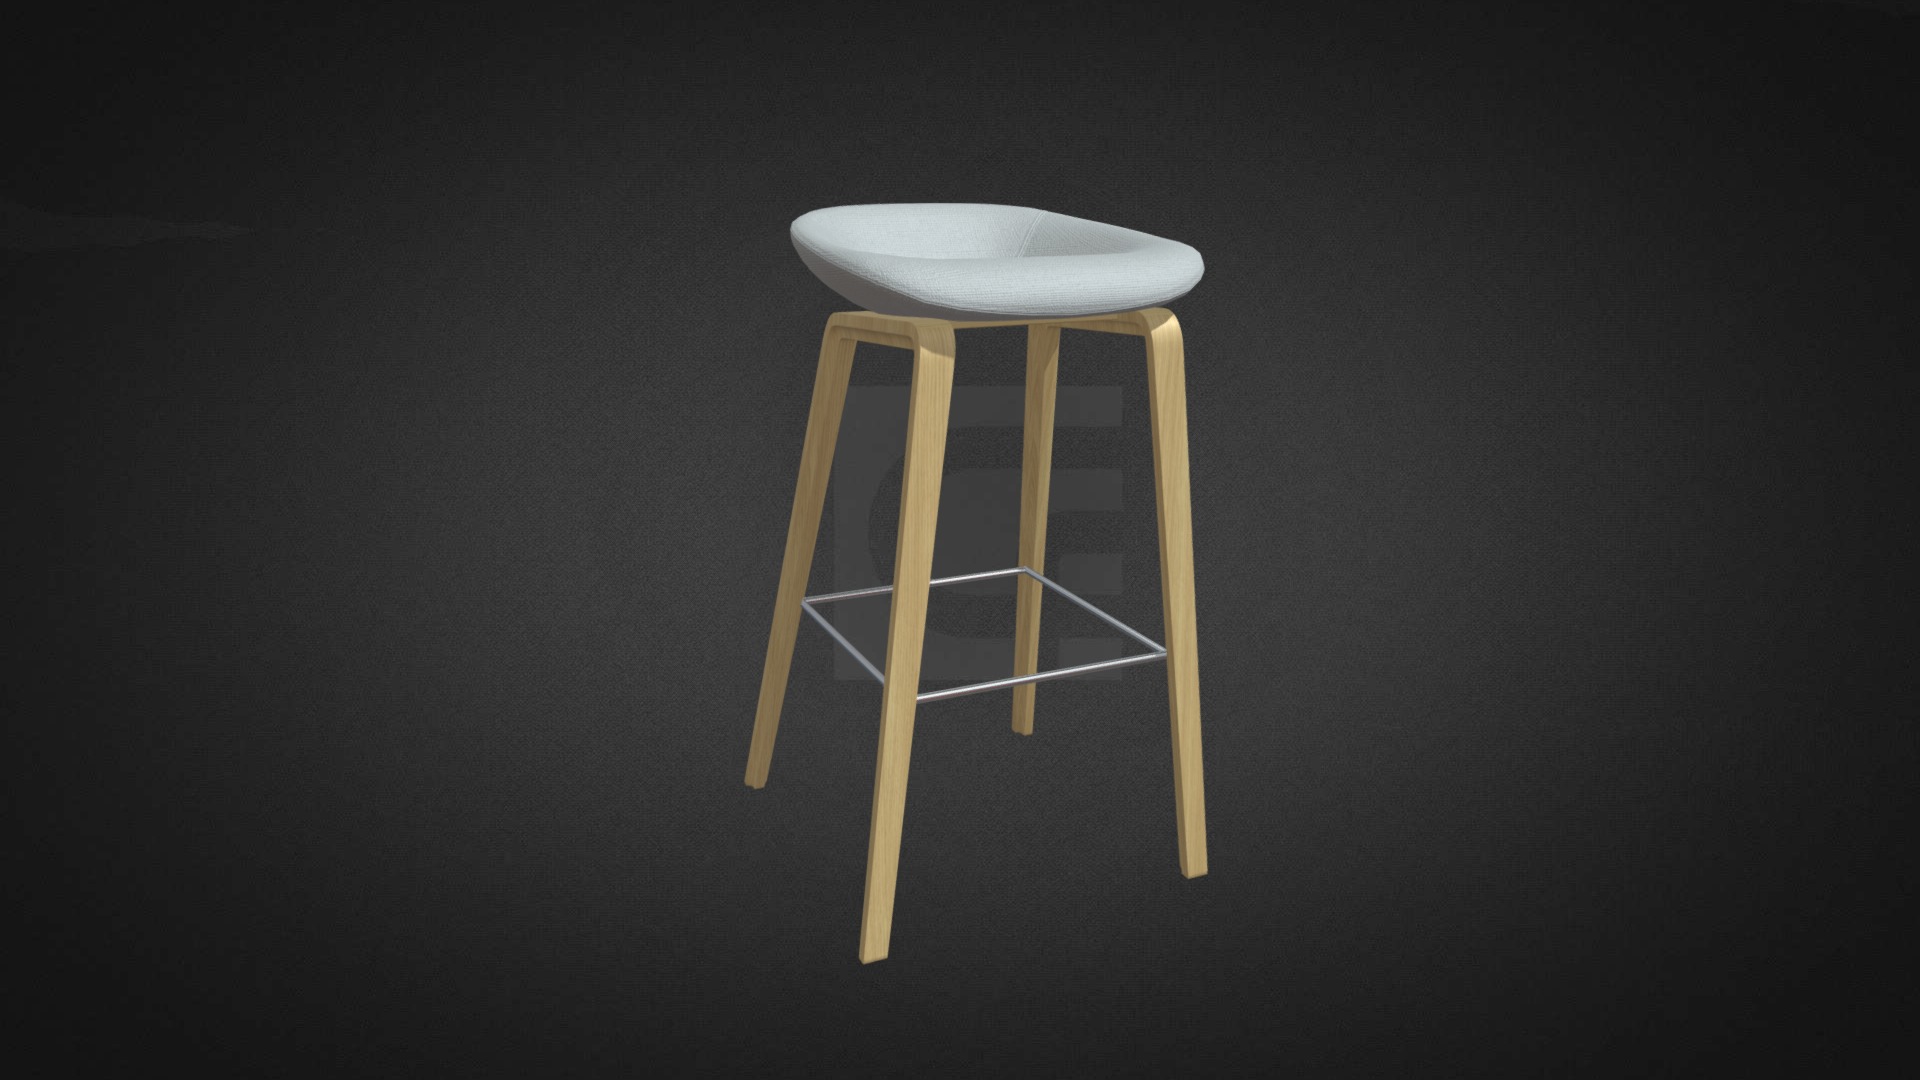 3D model Padded Finn Stool Hire - This is a 3D model of the Padded Finn Stool Hire. The 3D model is about a stool on a black background.